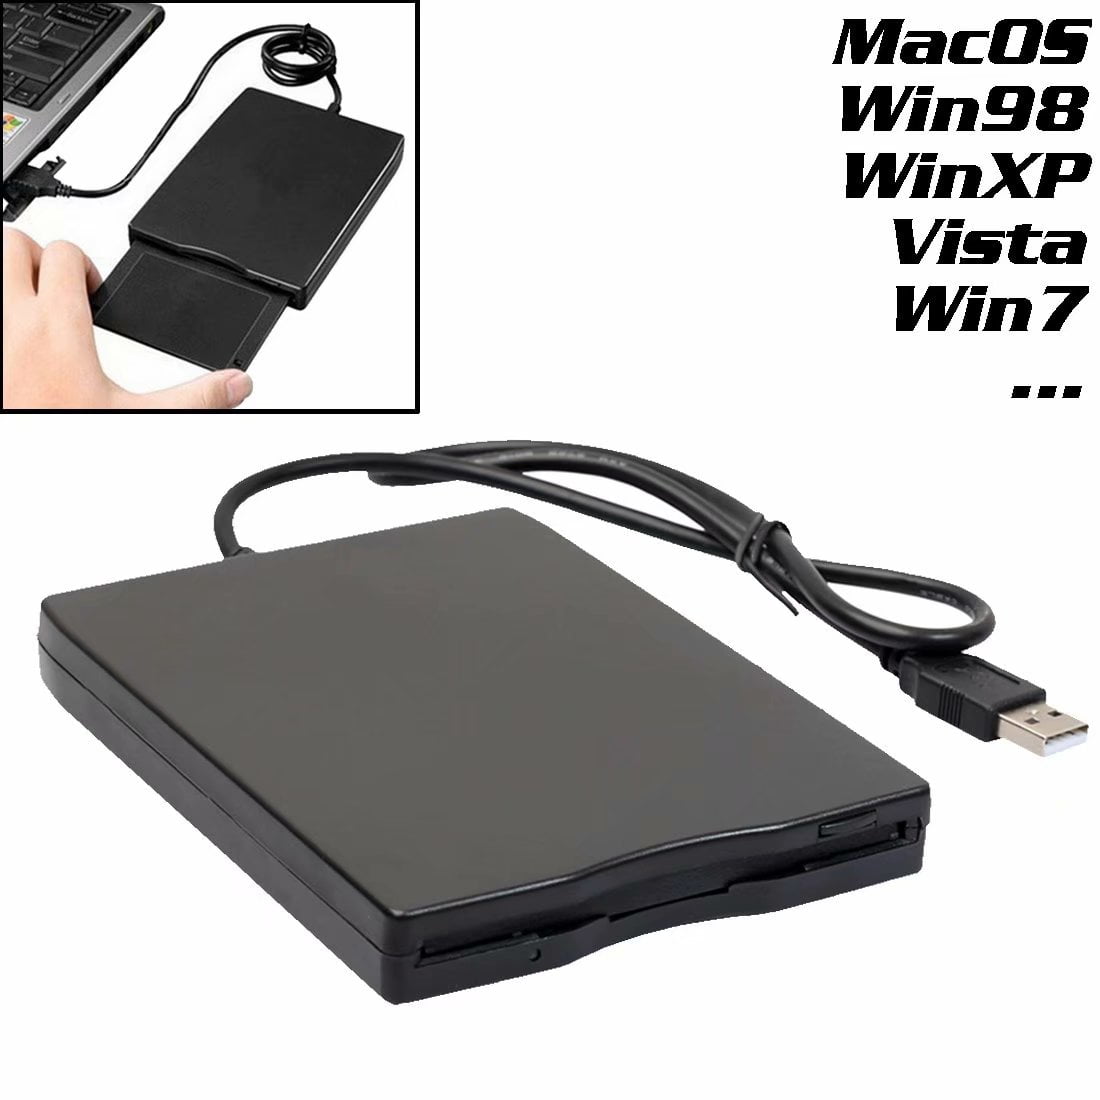 3.5 inch Portable USB 2.0 External Floppy Disk Drive for PC Windows 98 ...